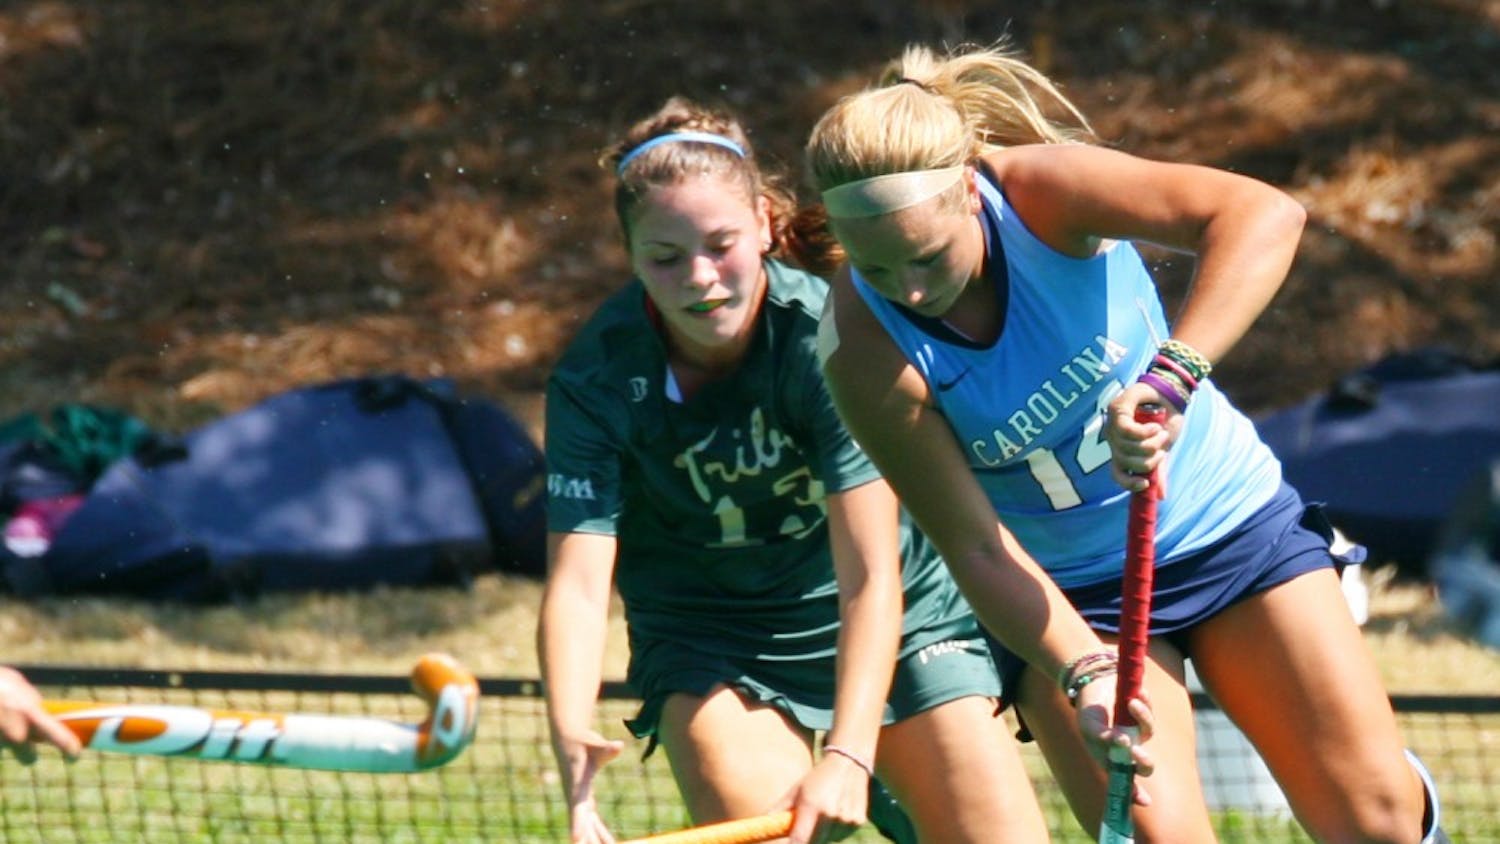 Kelsey Kolojejchick was 1 for 3 for shots in goal in the Tar Heel's 5-0 victory over William and Mary Sunday.